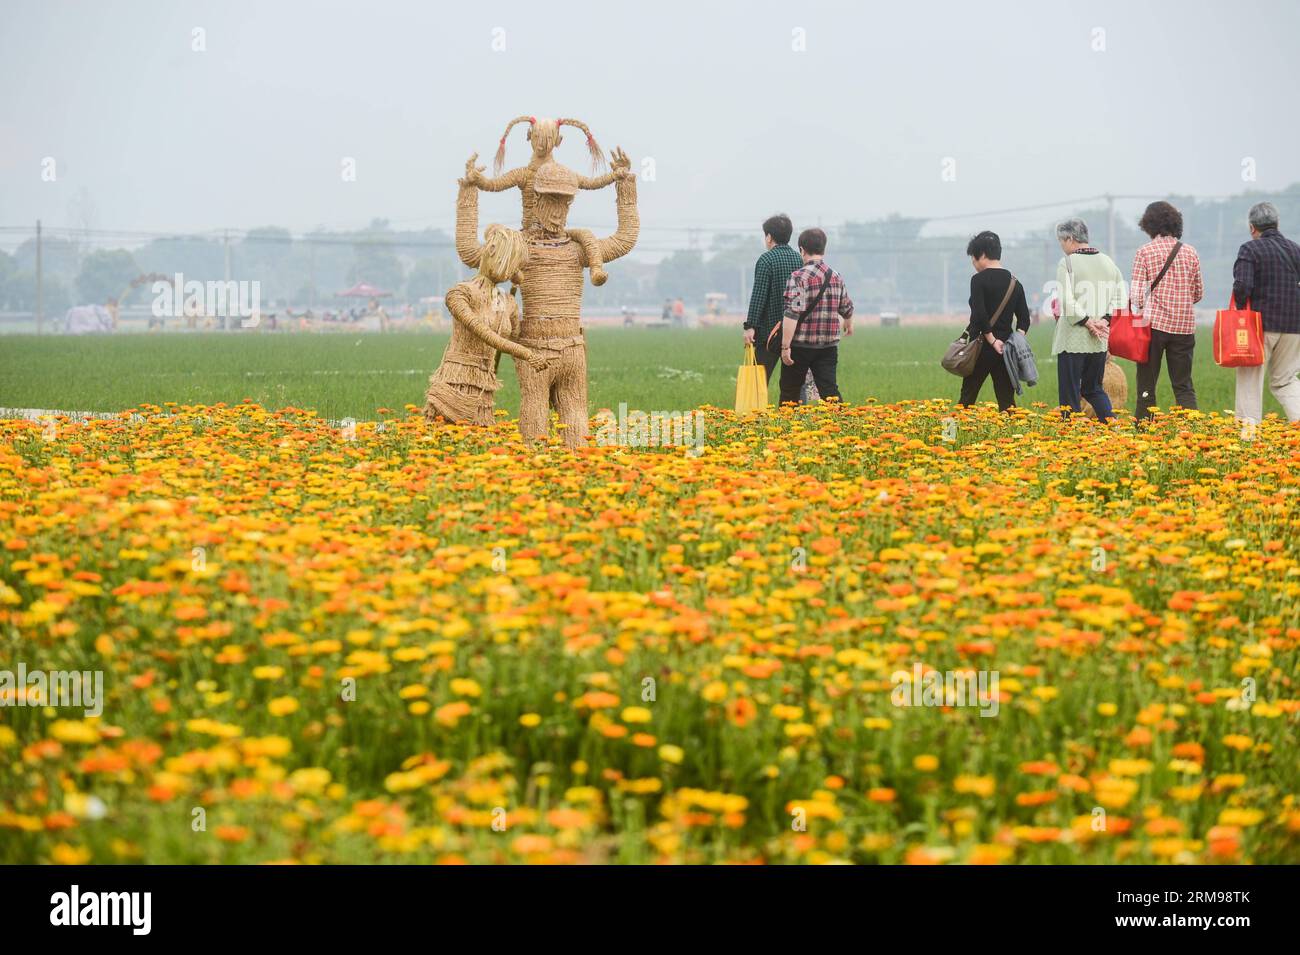 (140513) -- TONGLU, May 13, 2014 (Xinhua) -- Tourists visit the fields of flowers outside the swinery tea bar in Dipu Village of Jiangnan Town in Tonglu County, east China s Zhejiang Province, May 13, 2014. Dipu Village, a national historical and cultural village with nearly a thousand years history, has committed to environment reform, village protection and tourism development for the past few years. The swinery tea bar sets a successful example of the transform. The bar used to be five messy stone houses for pigs keeping. After renovation, it functions as a modern tea bar with traditional a Stock Photo